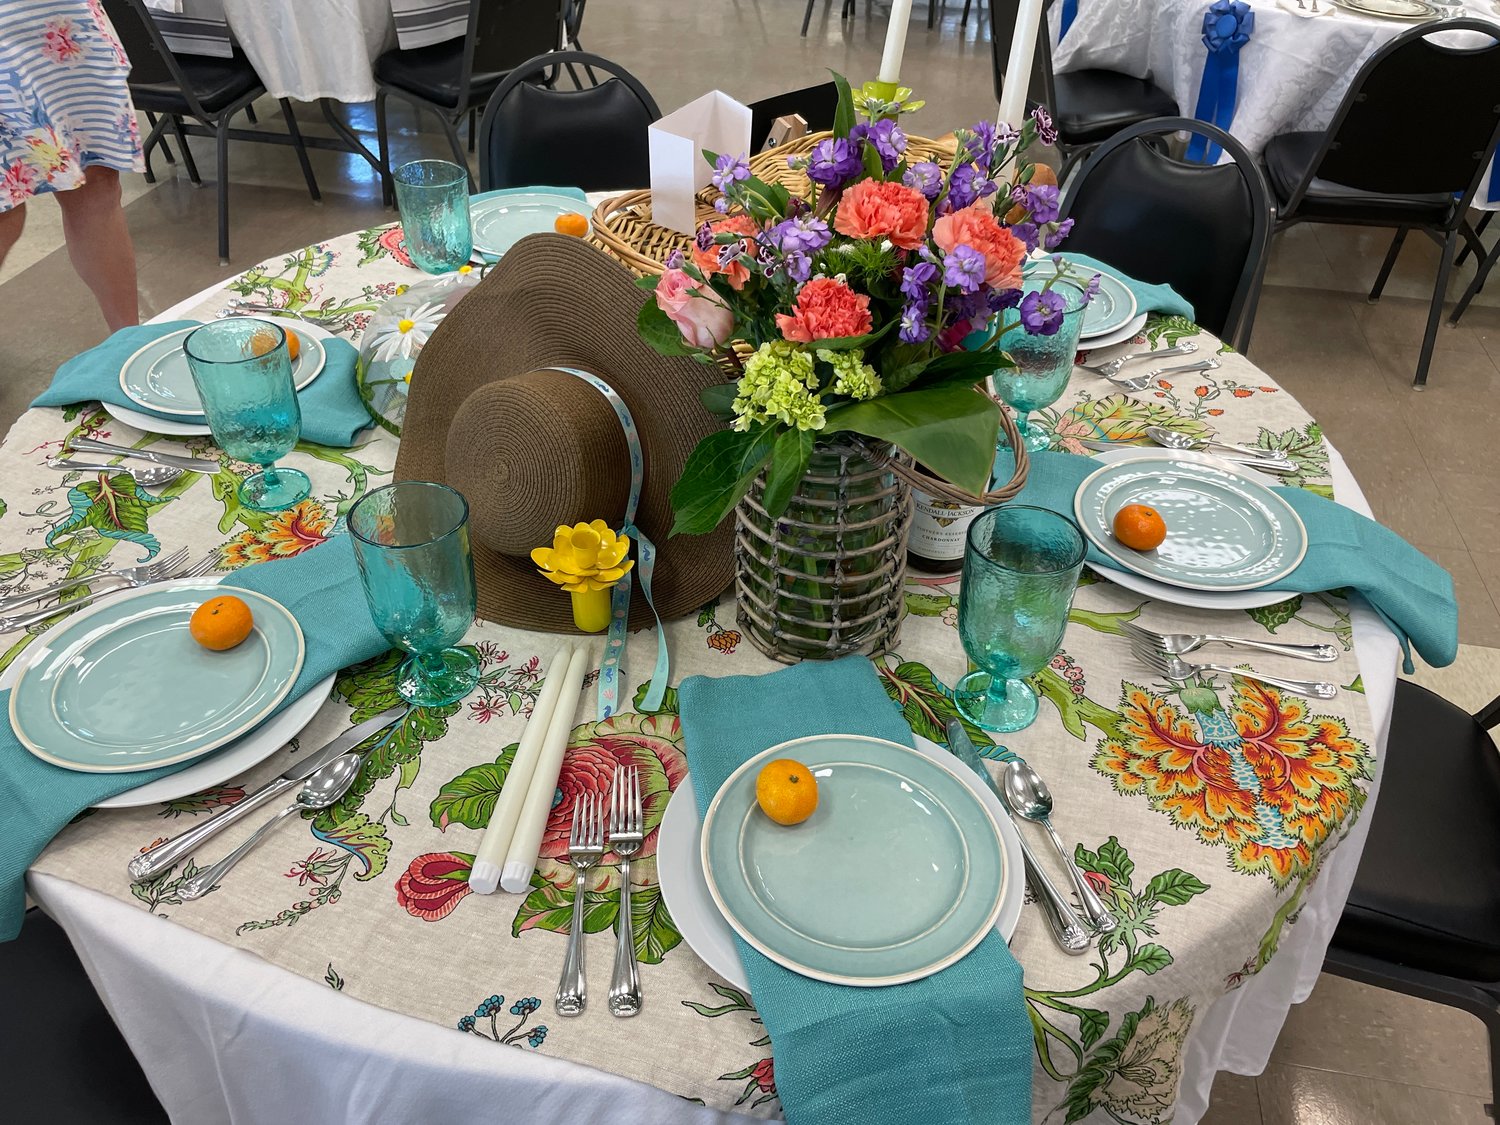 “Let’s Go on A Picnic” and “Alice in Wonderland” were two of the tables decorated by club members for the attendees who were treated to lunch, the interactive art demonstration and a silent auction. Proceeds from the event will benefit the many community endeavors of the club, including McKemie Place, Mary’s Shelter, Camille Place, Distinguished Young Woman and the William F. Green Veterans’ Home.